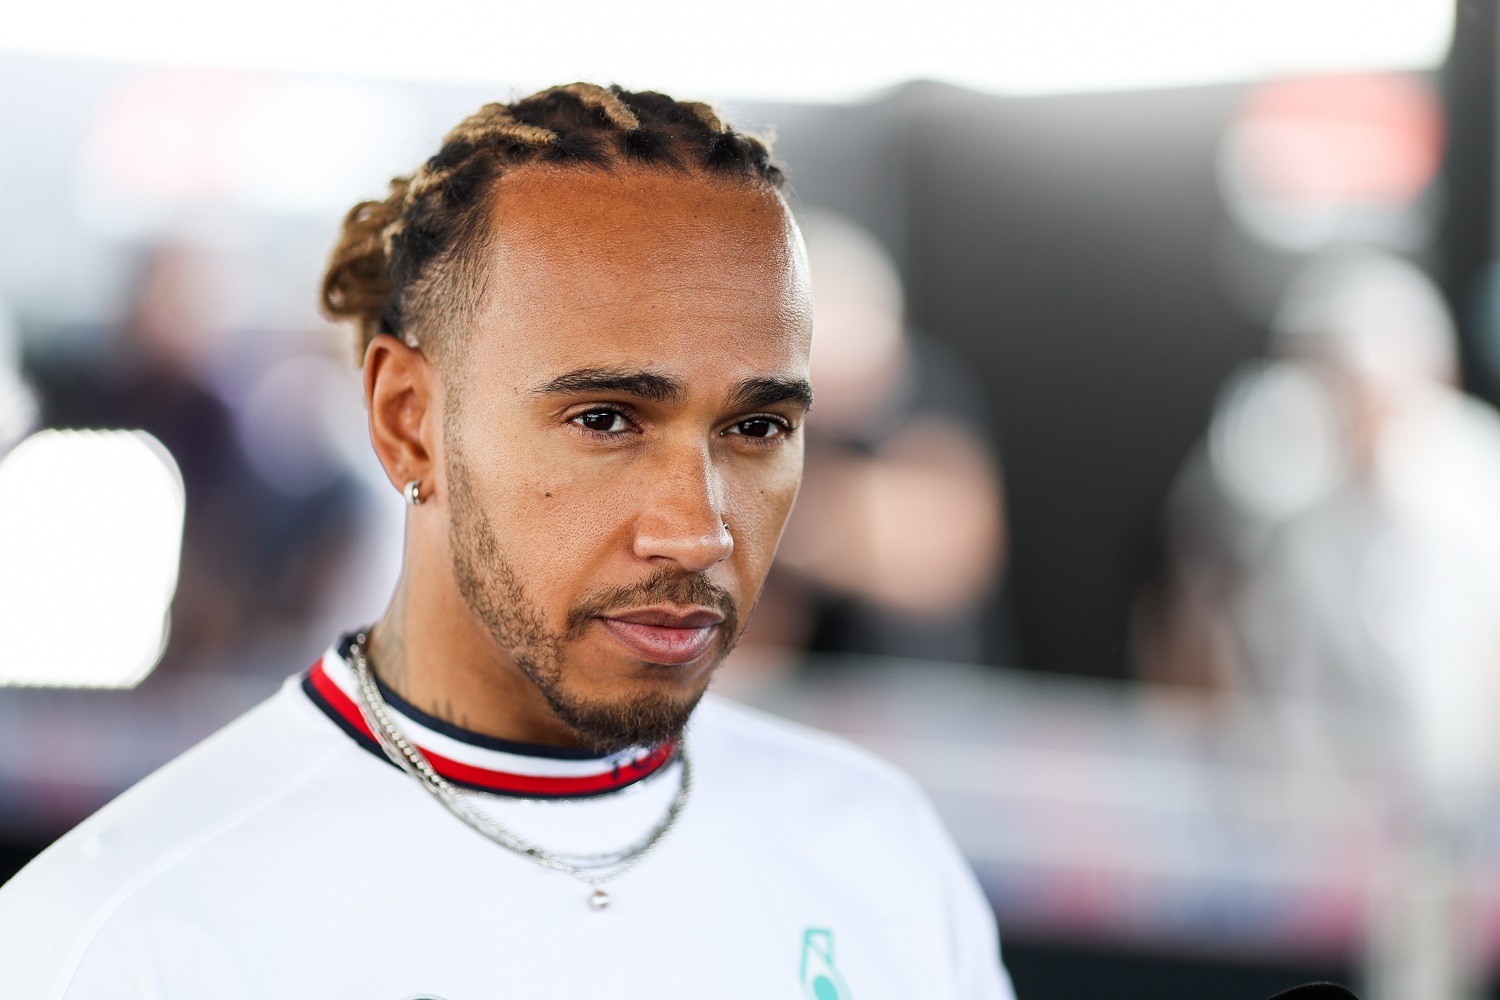 Lewis Hamilton during practice ahead of the Grand Prix of Canada at Circuit Gilles Villeneuve on June 17, 2022 in Montreal. | Peter J Fox/Getty Images